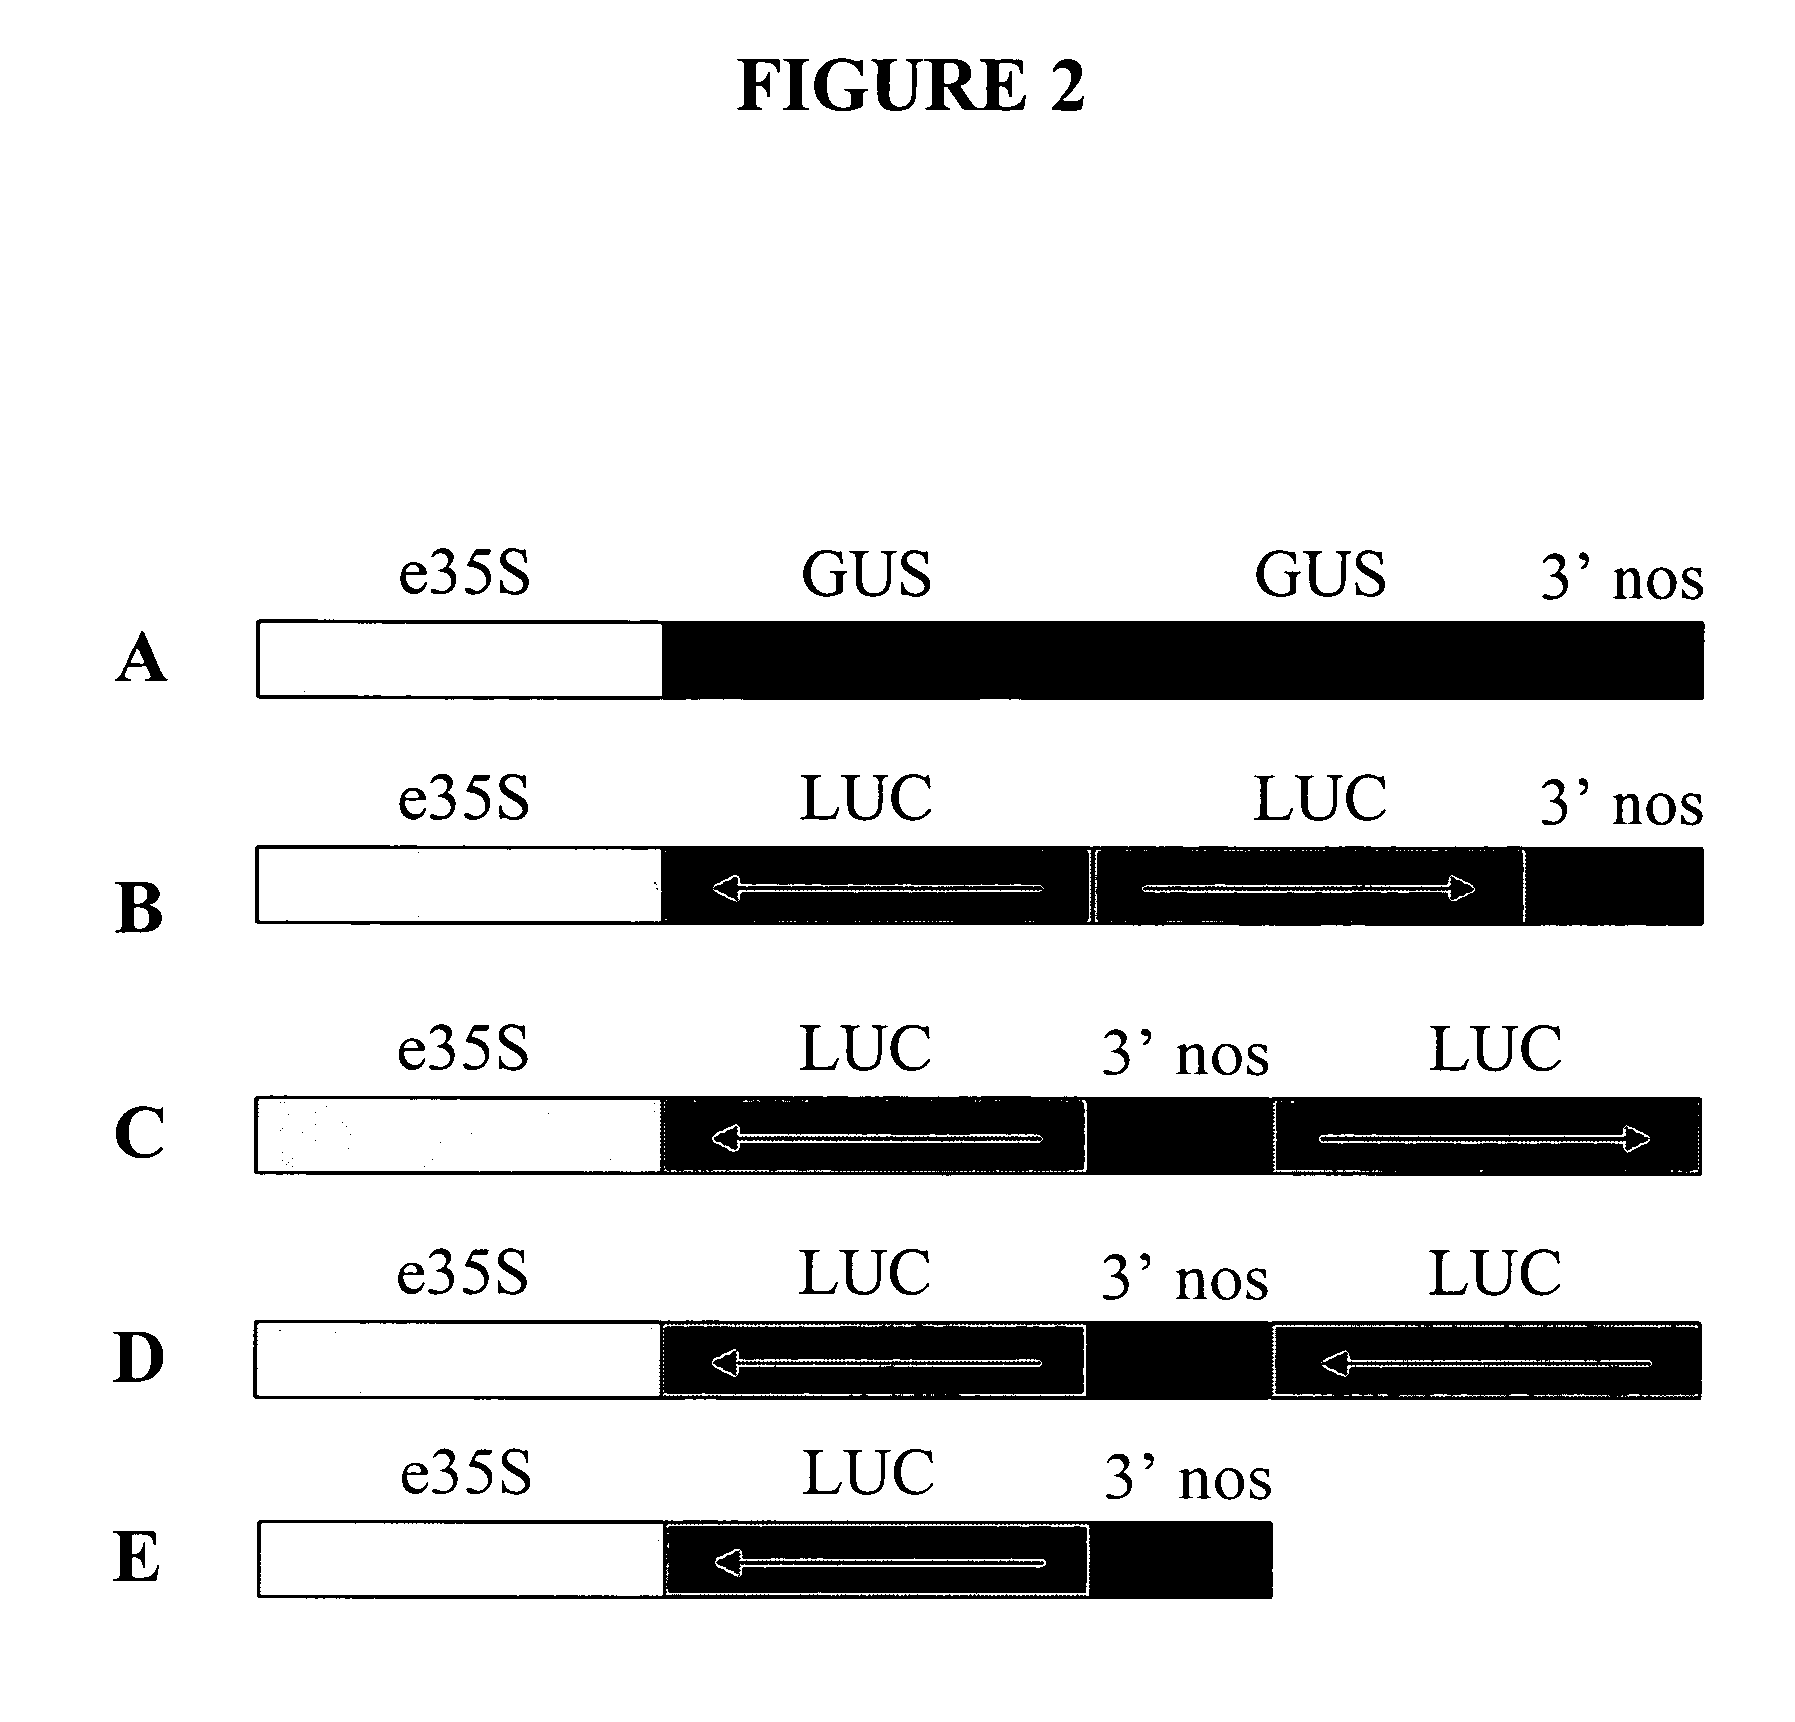 Recombinant DNA constructs and methods for controlling gene expression